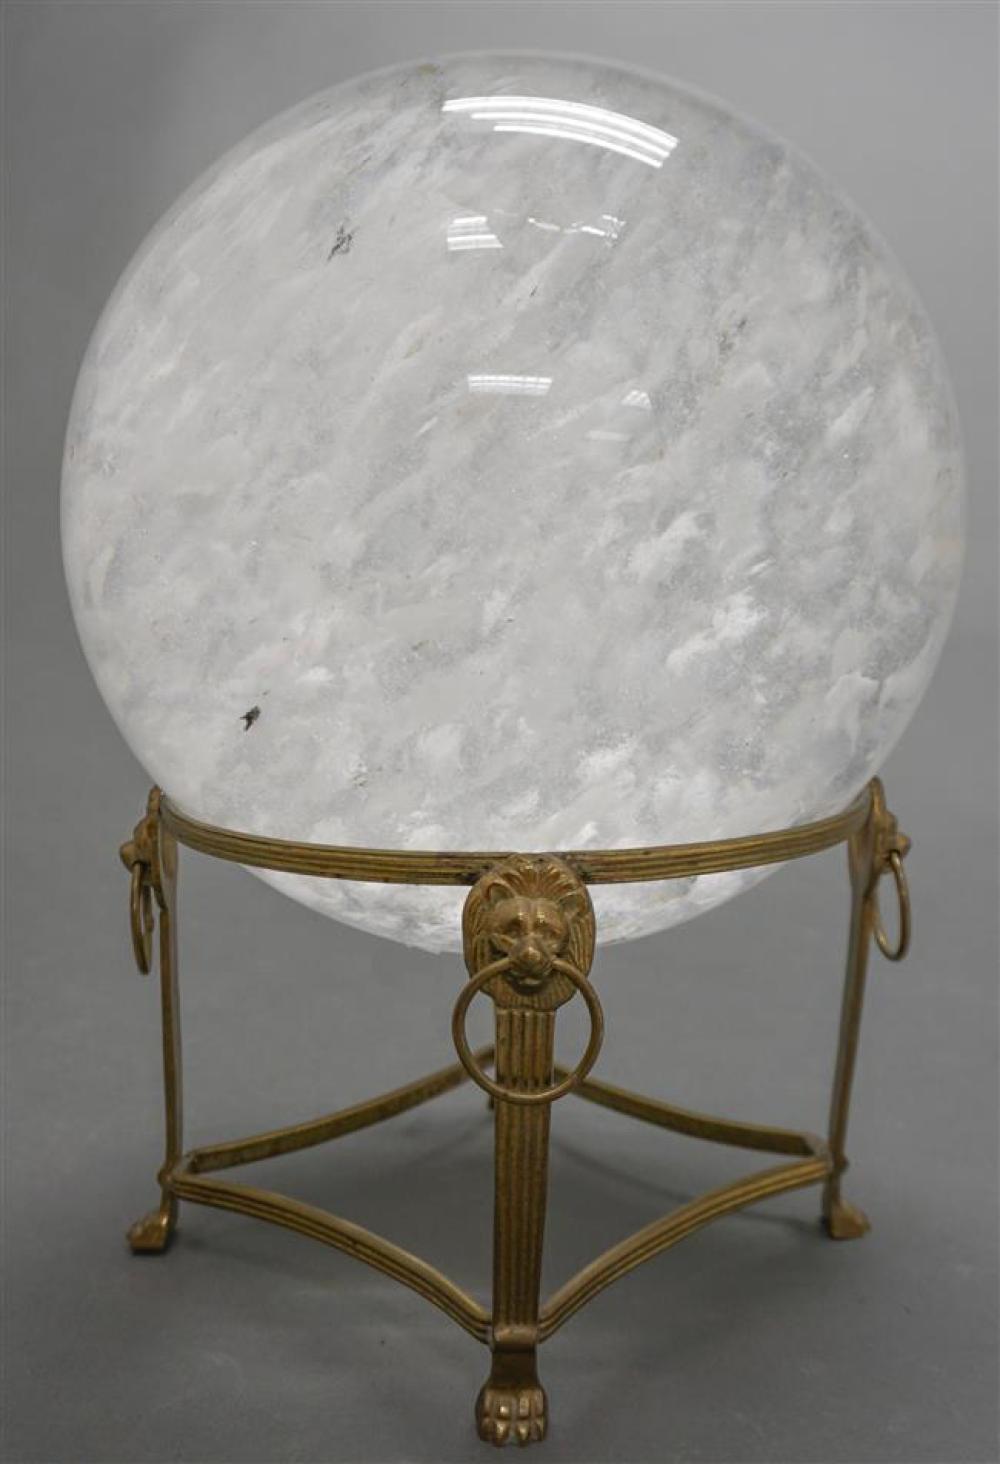 CONTEMPORARY GLASS SPHERE ON BRASS 32242a